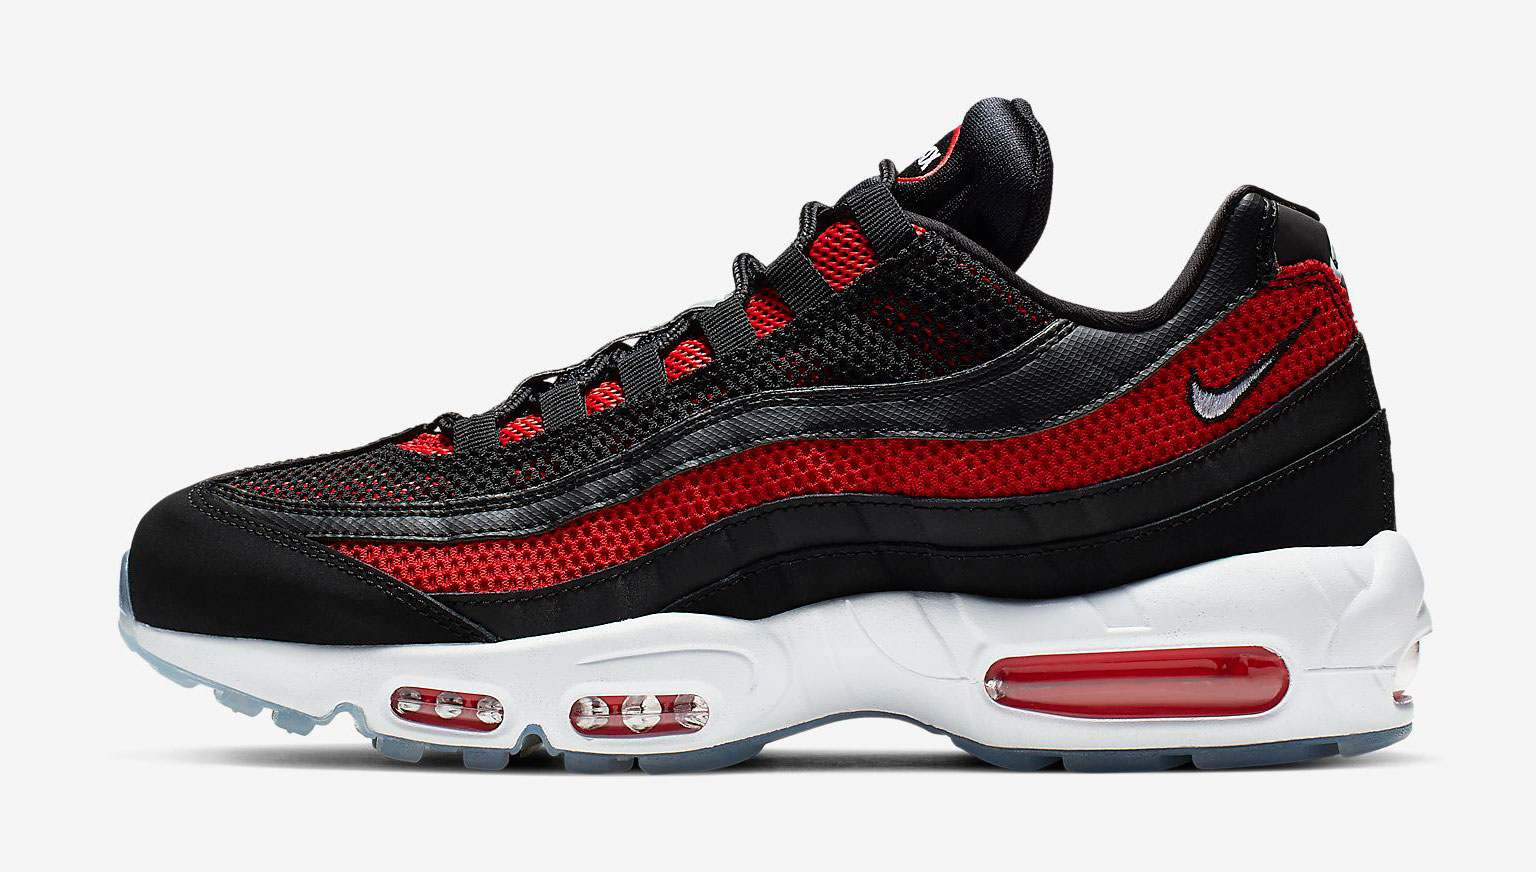 nike-air-max-95-black-red-white-bred-release-date-where-to-buy